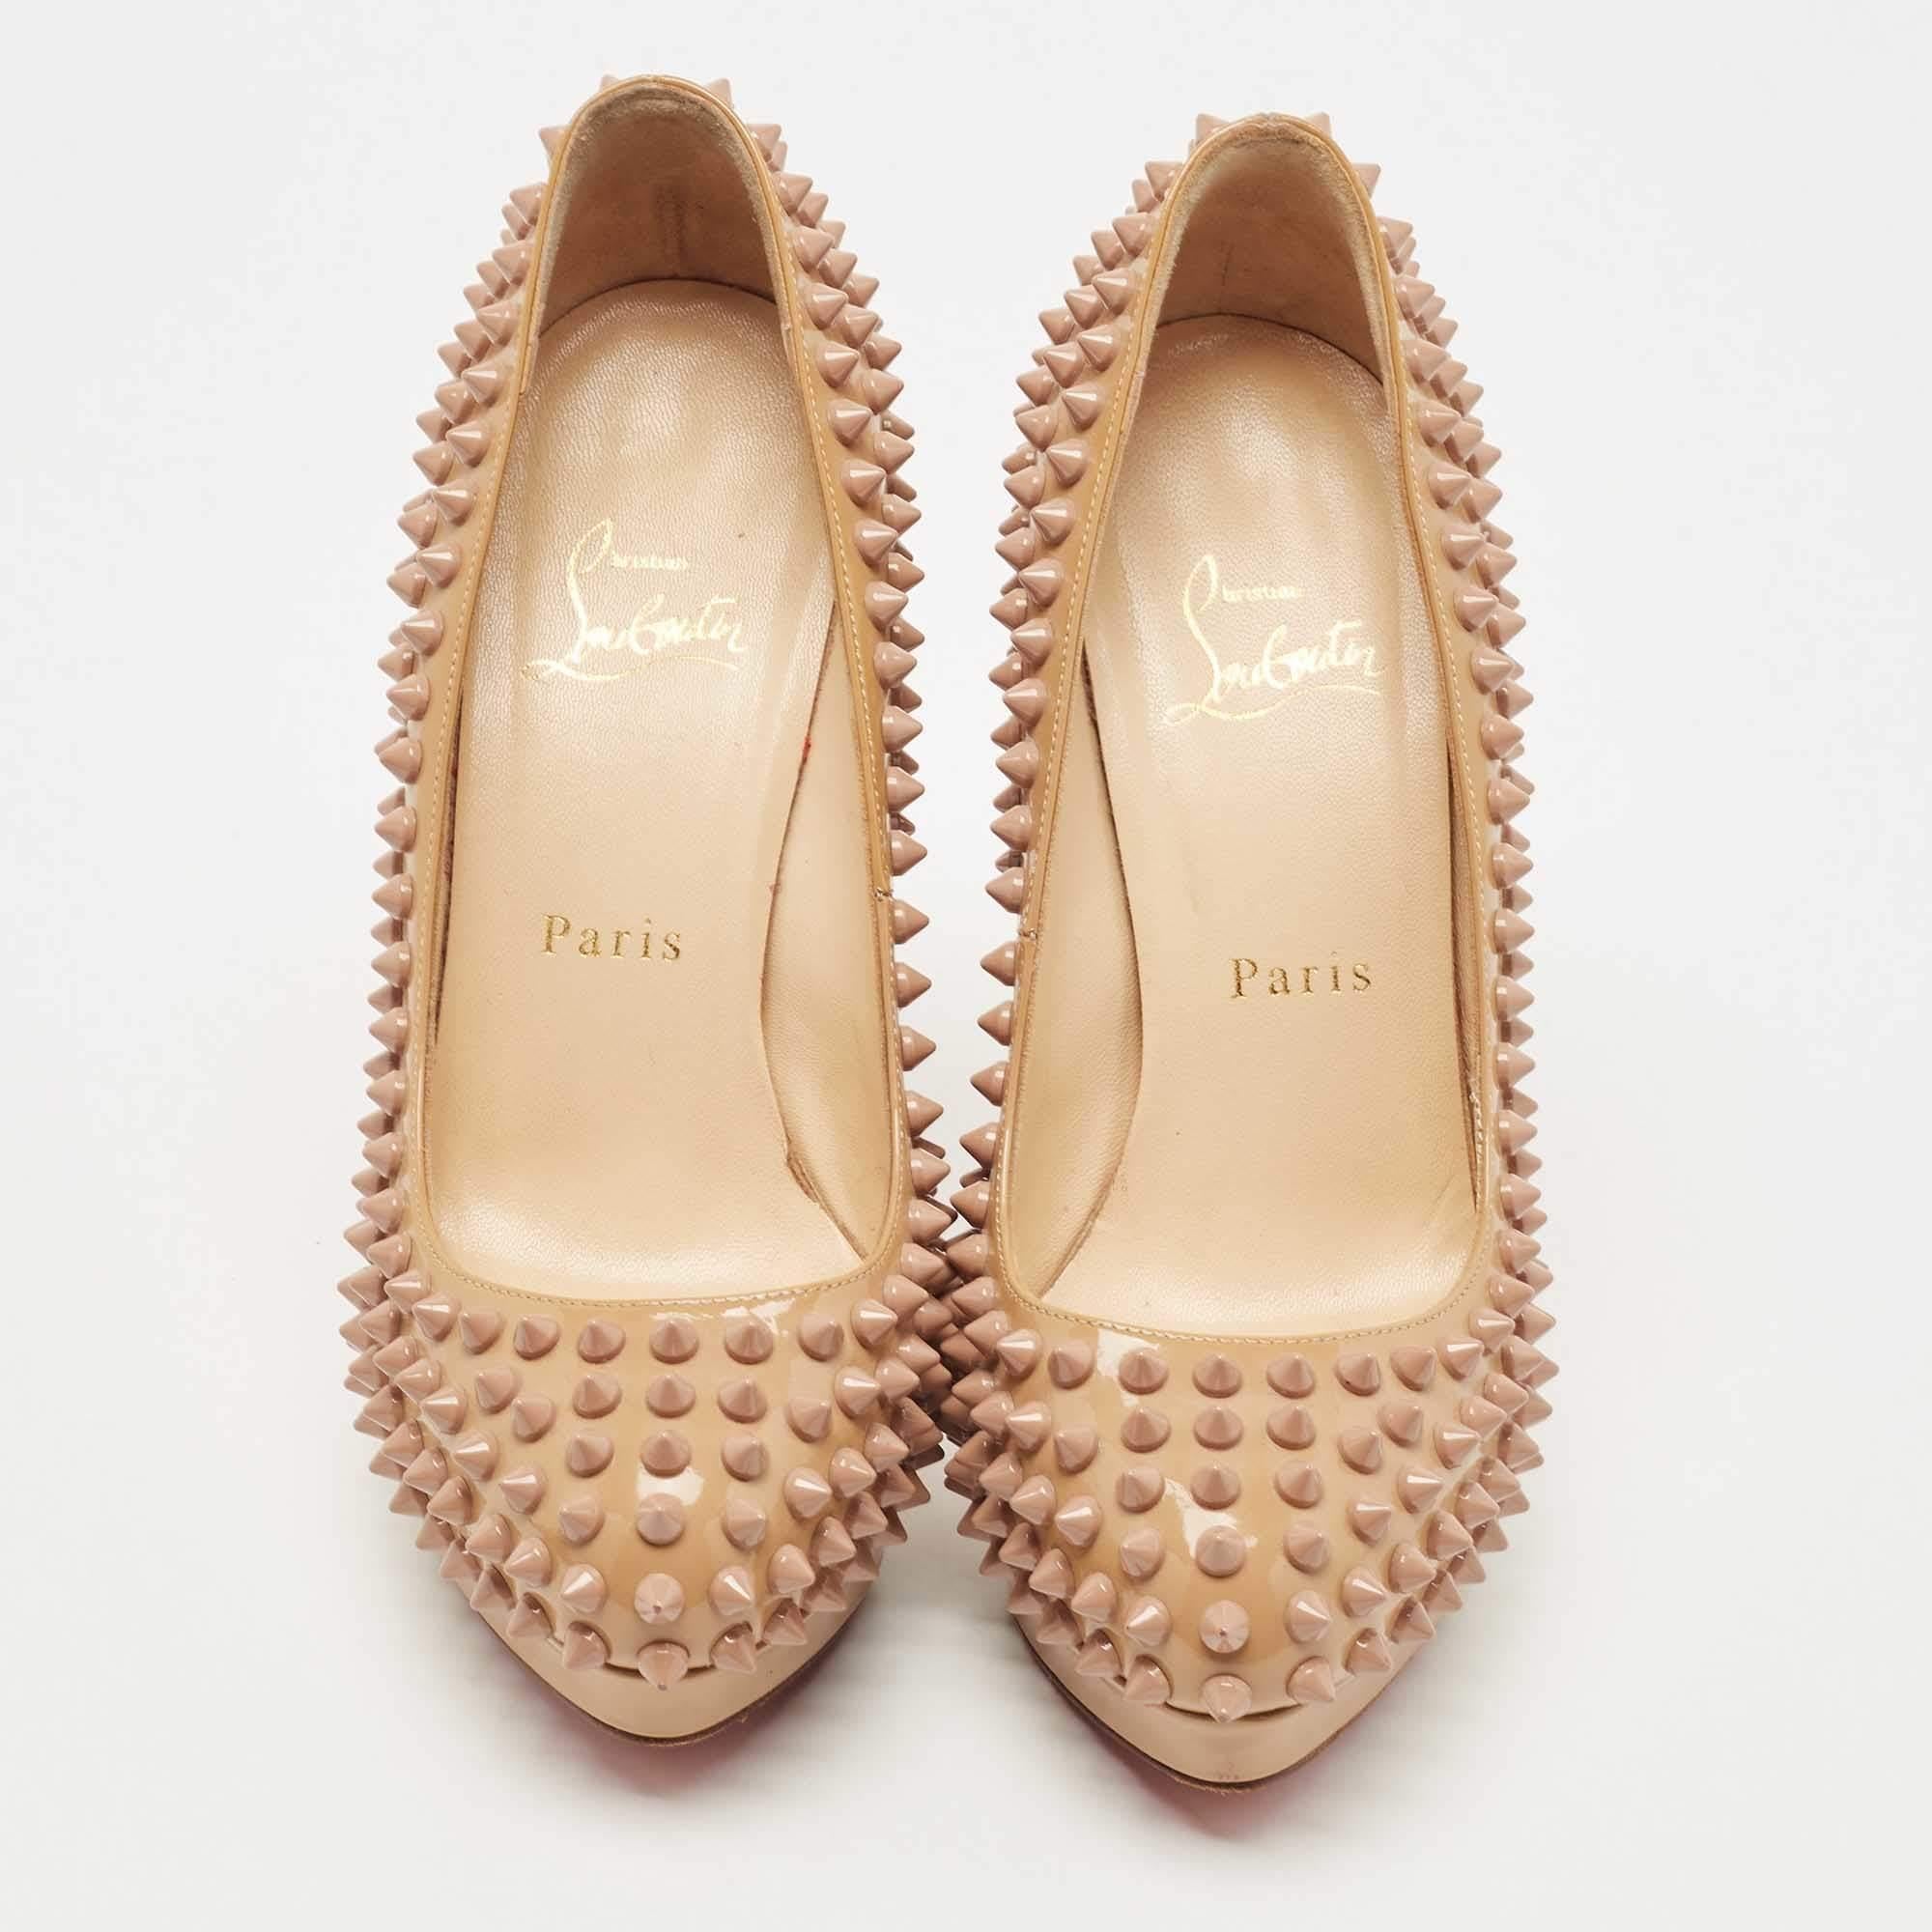 Women's Christian Louboutin Beige Patent Leather Alti Spiked Platform Pumps Size 36 For Sale